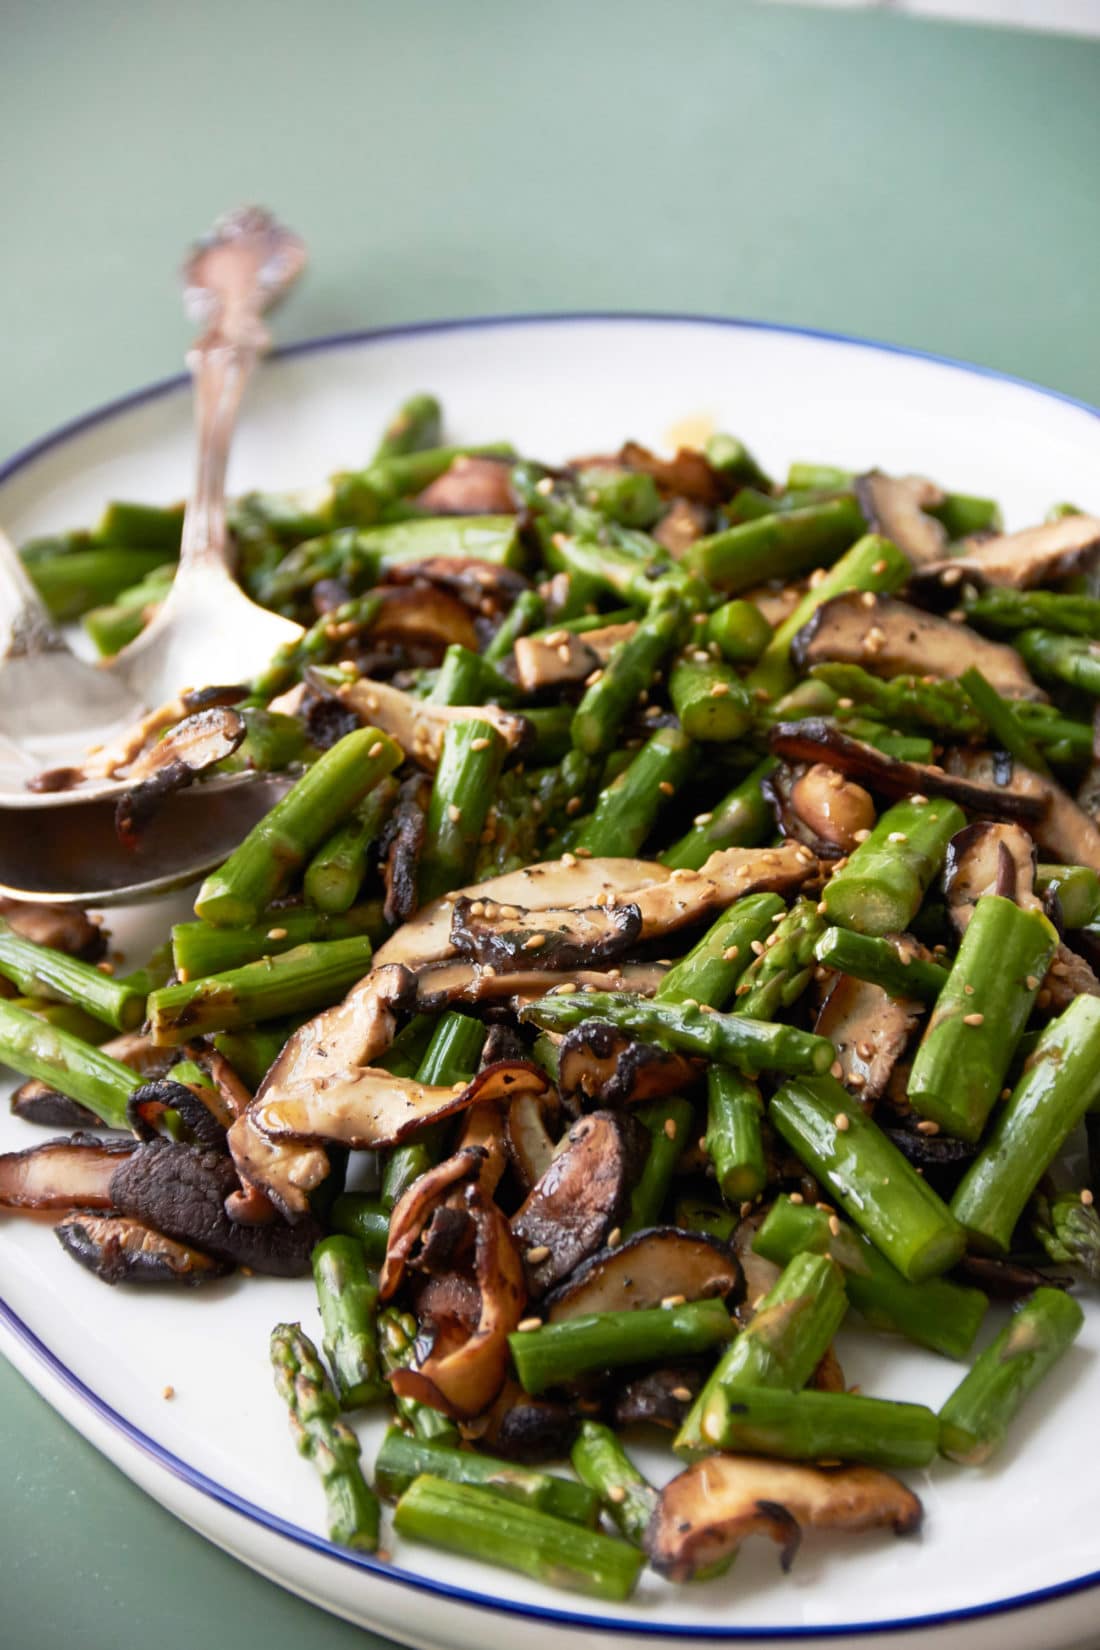 Serving dish piled high with Sesame Asparagus and Shiitake Mushrooms.